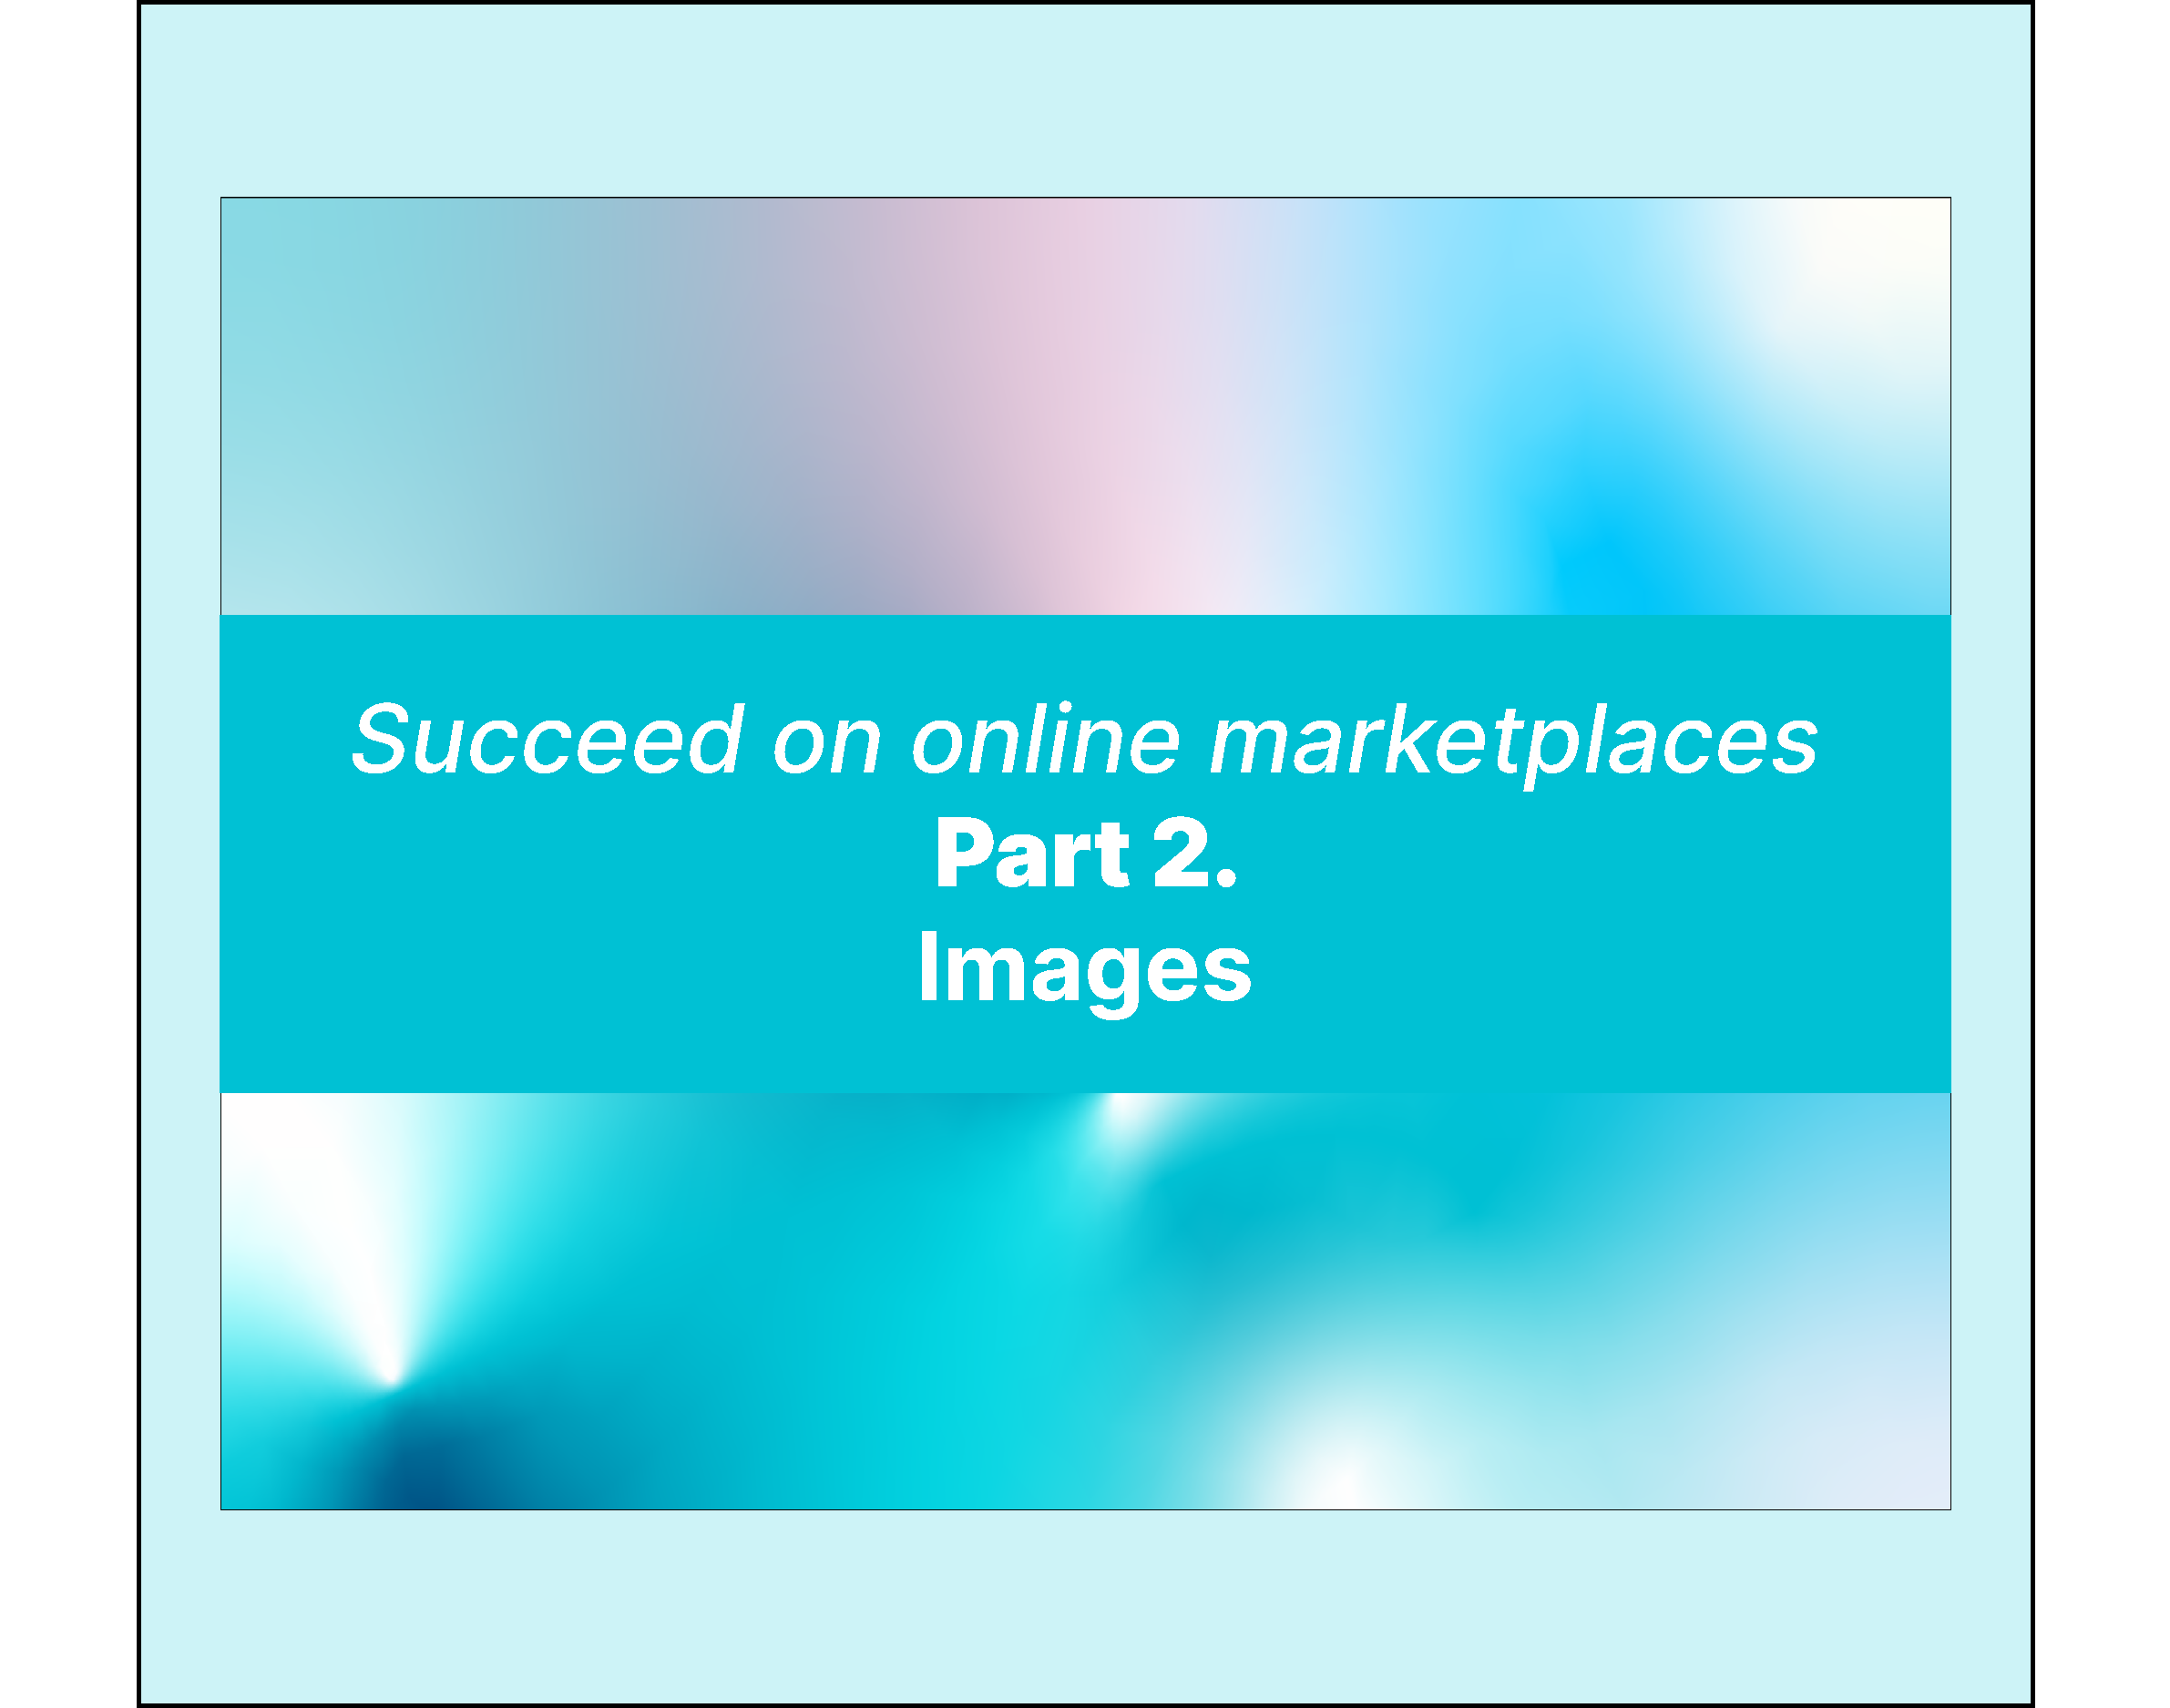 Succeed on online marketplaces - Part 2. Images